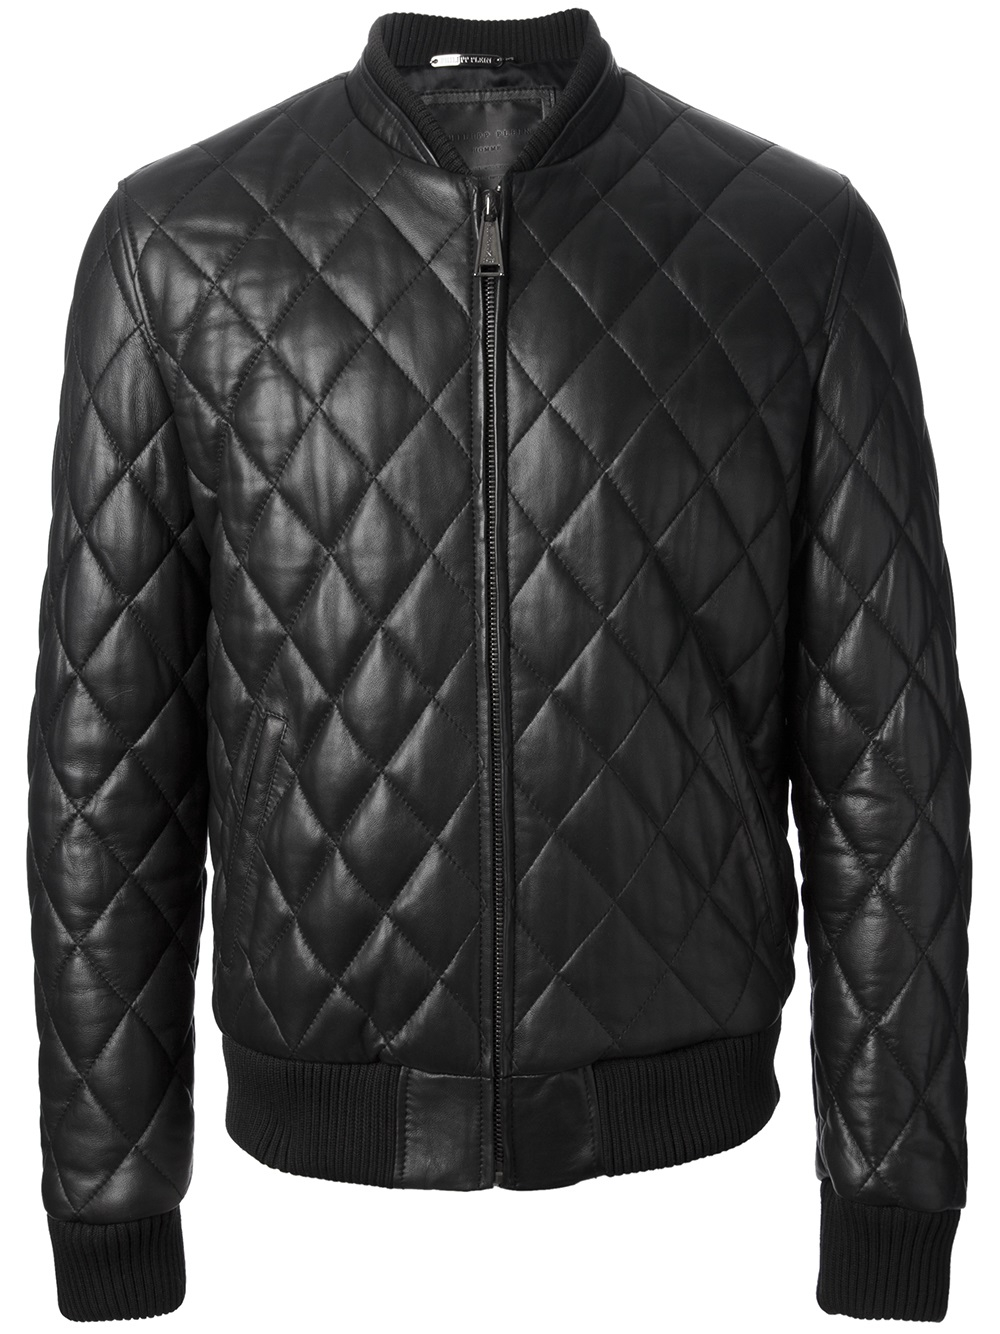 Lyst - Philipp Plein Quilted Bomber Jacket in Black for Men